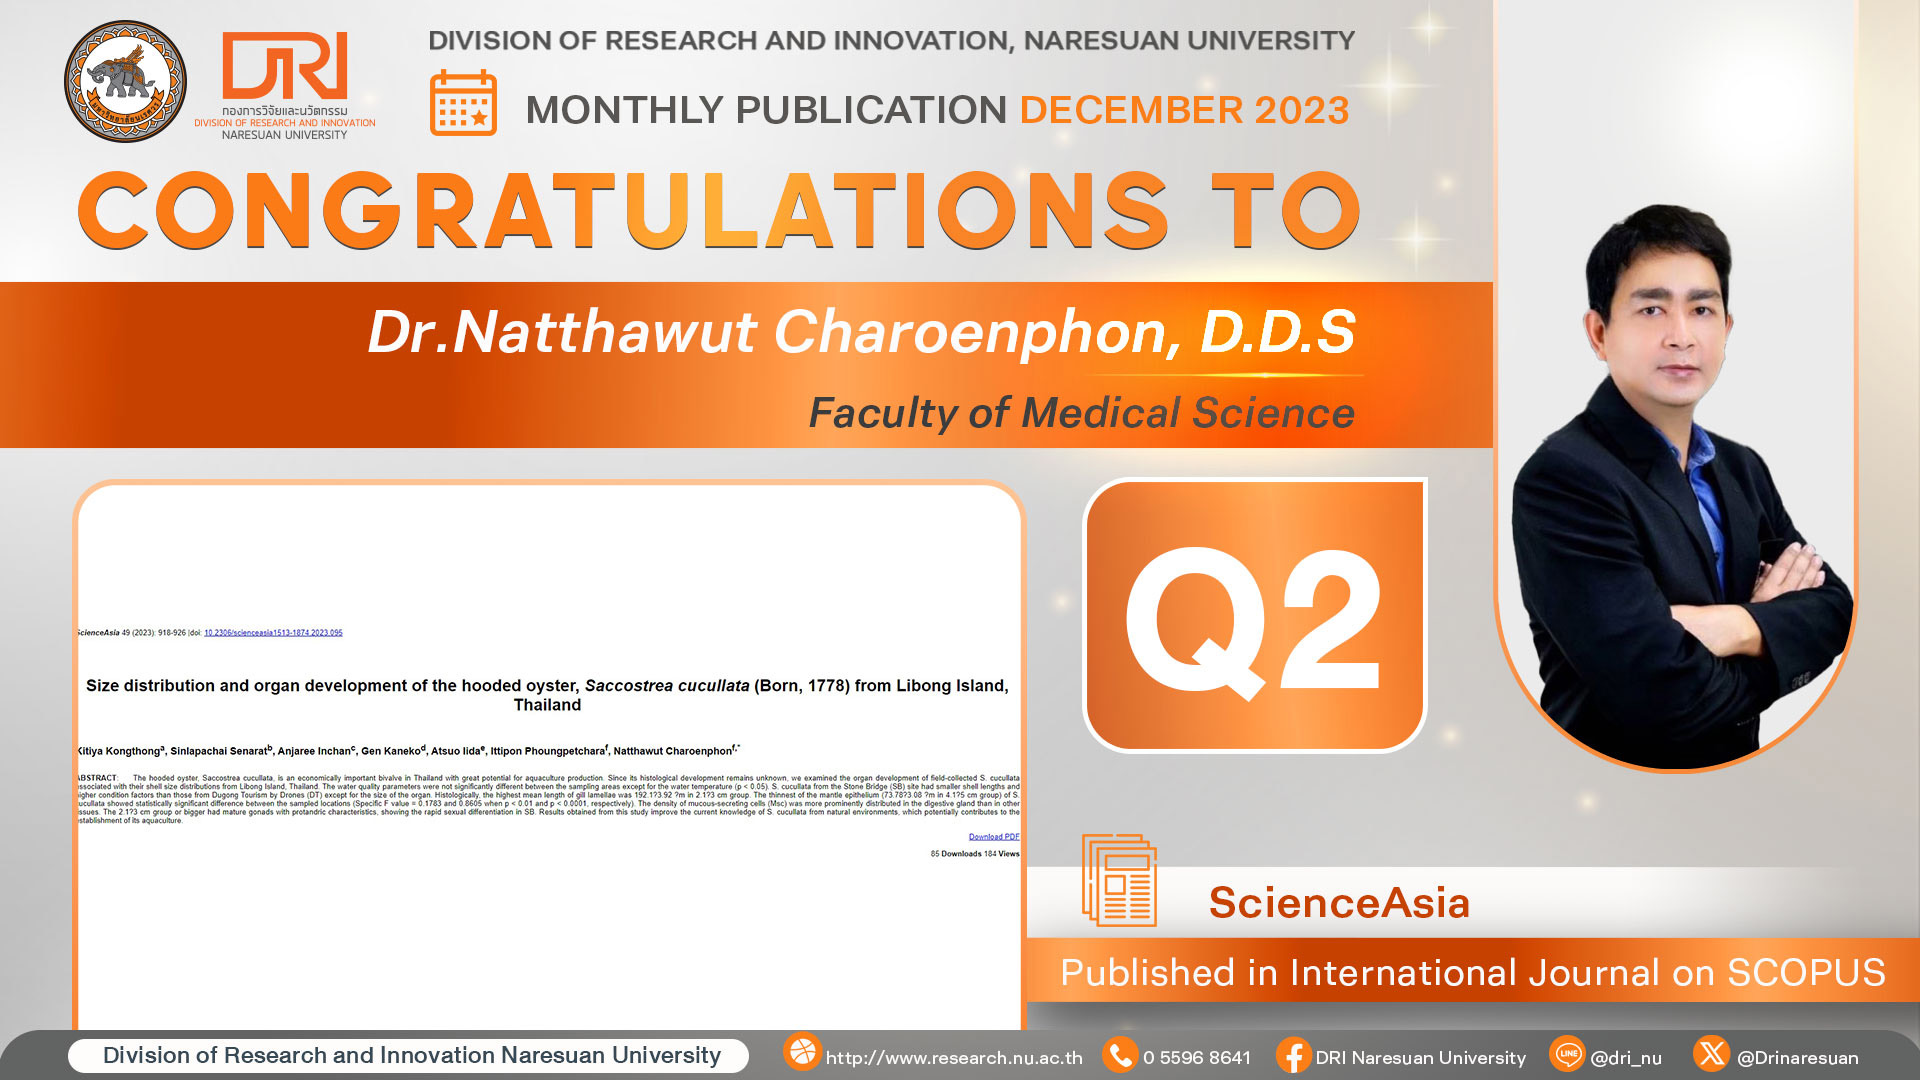 Congratulations to Dr.Natthawut Charoenphon, D.D.S Published in International Journal on SCOPUS